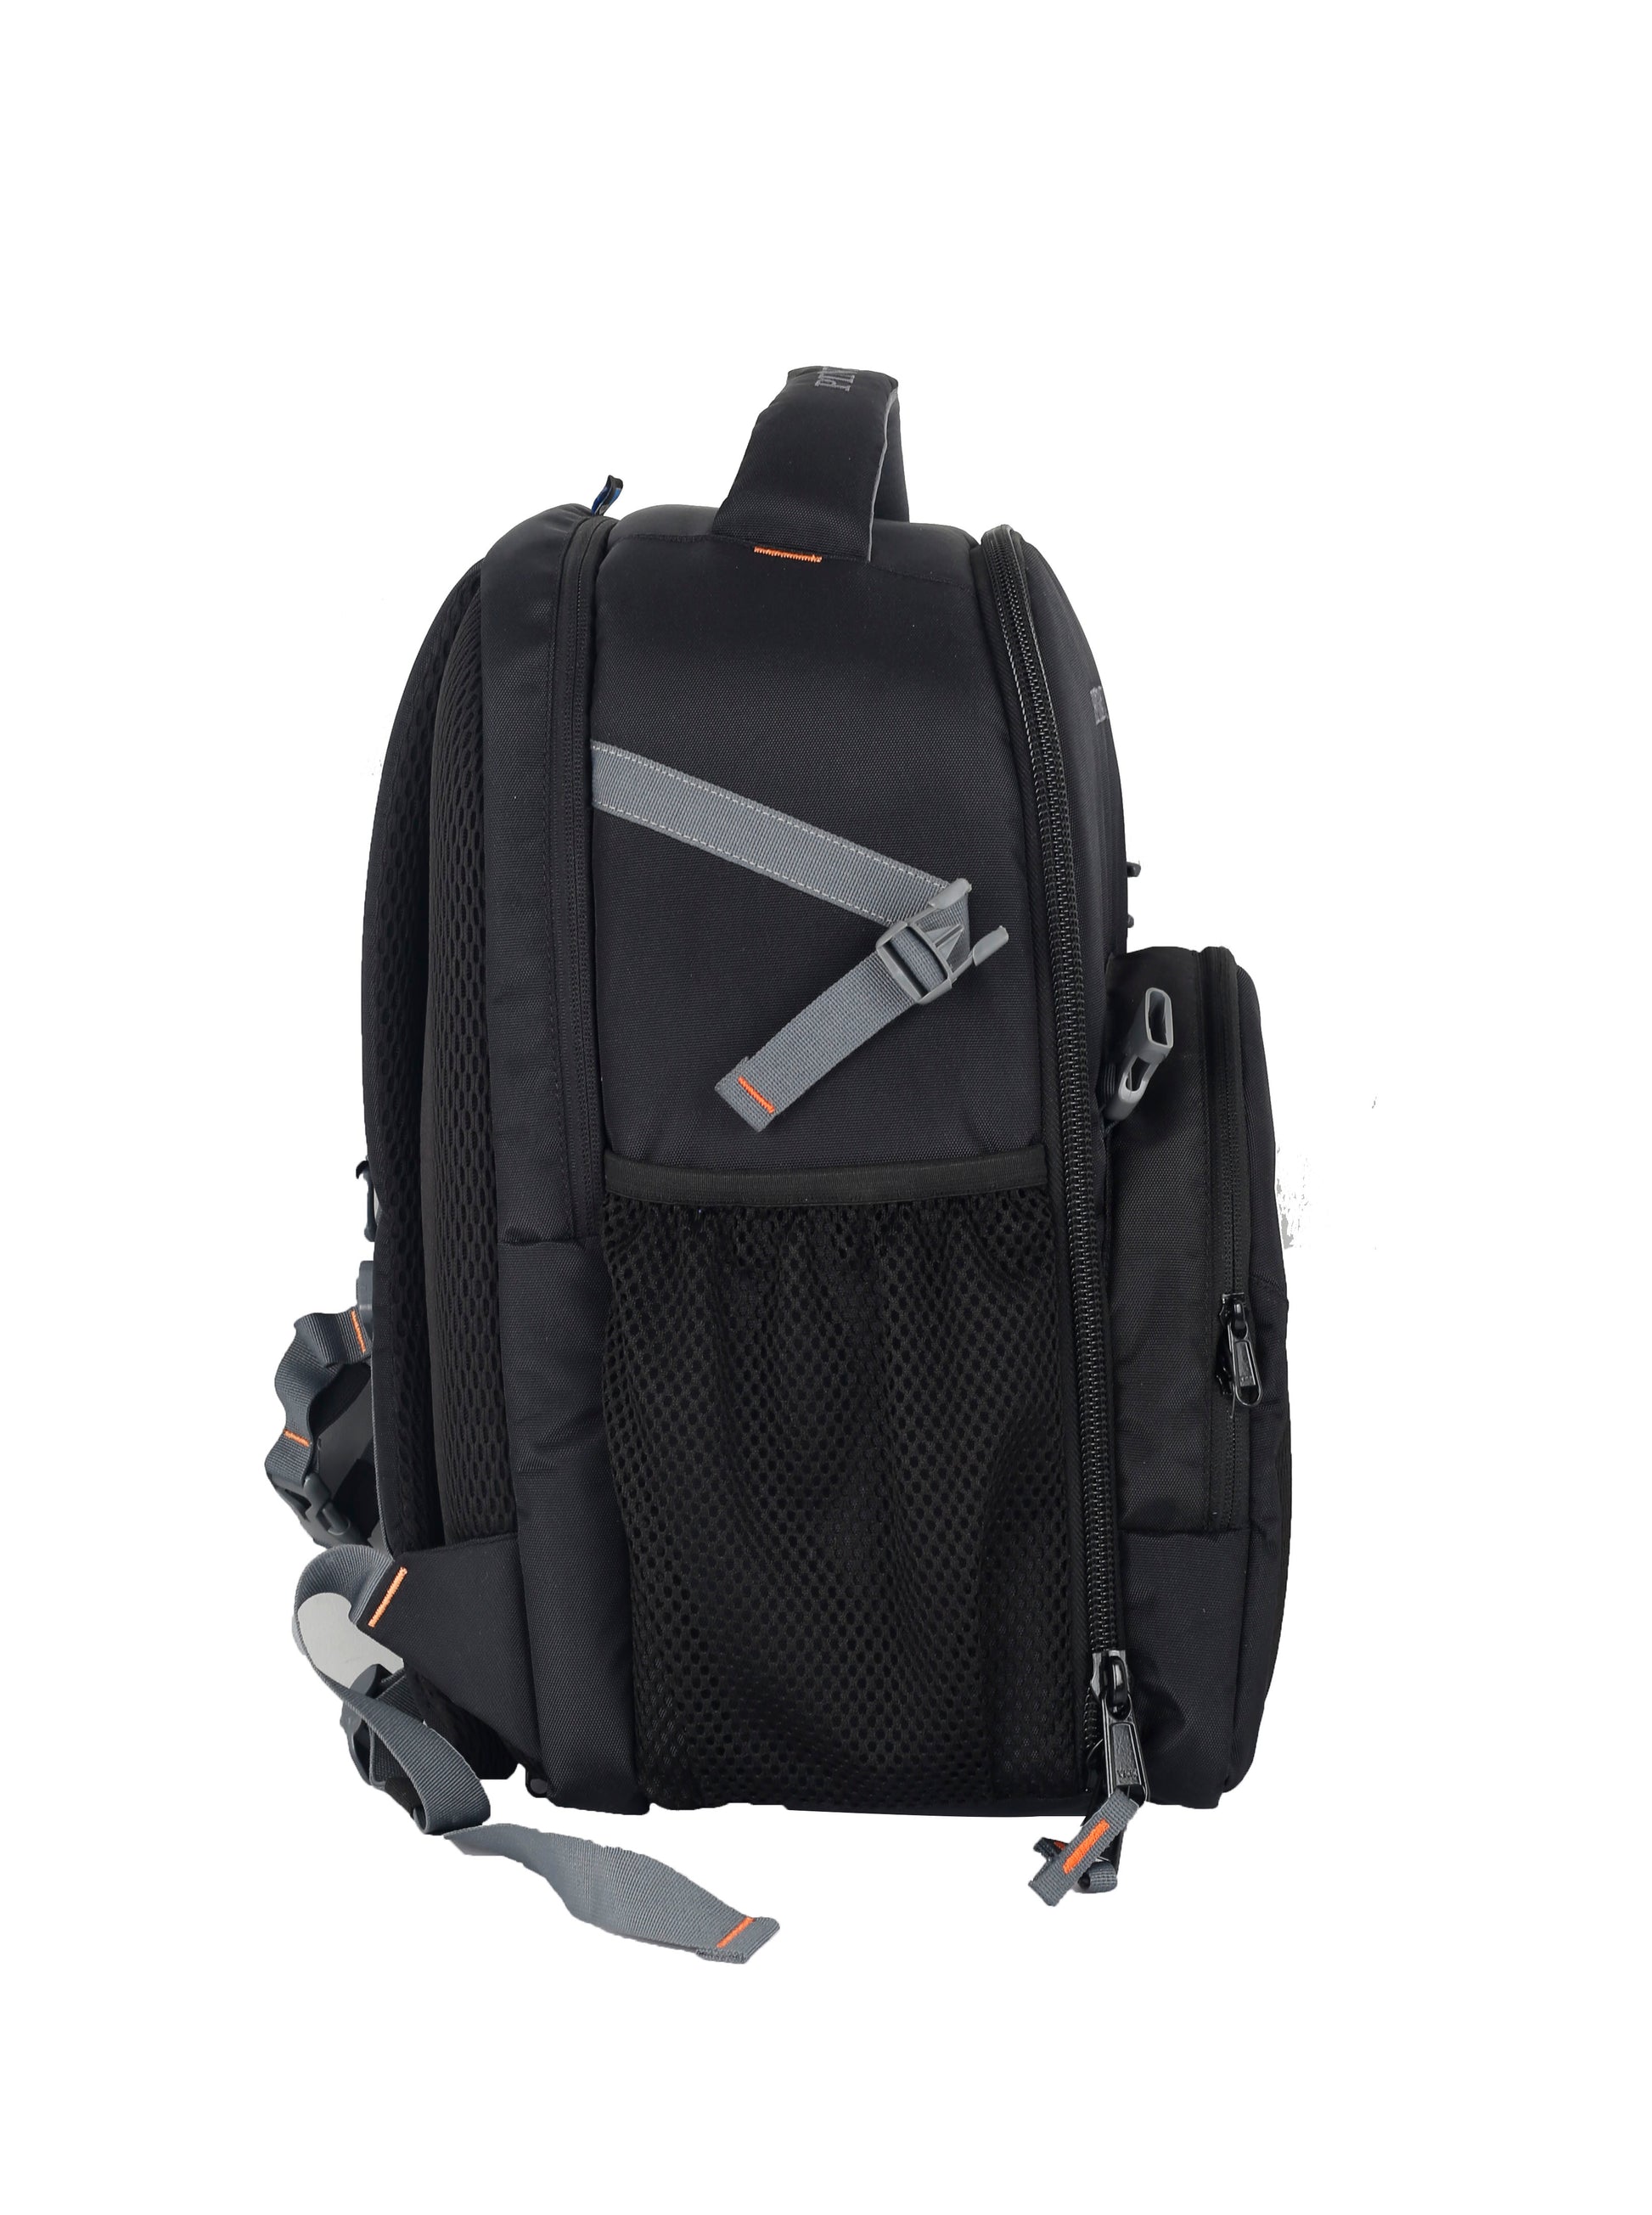 Image: Side view of the P33 Sniper DSLR camera backpack, highlighting its convenient water bottle mesh pocket and the dedicated rear laptop compartment. The water bottle mesh pocket offers easy access to hydration on the go, while the laptop compartment provides secure storage for your laptop or tablet. Stay hydrated and keep your digital devices protected with the P33 Sniper.